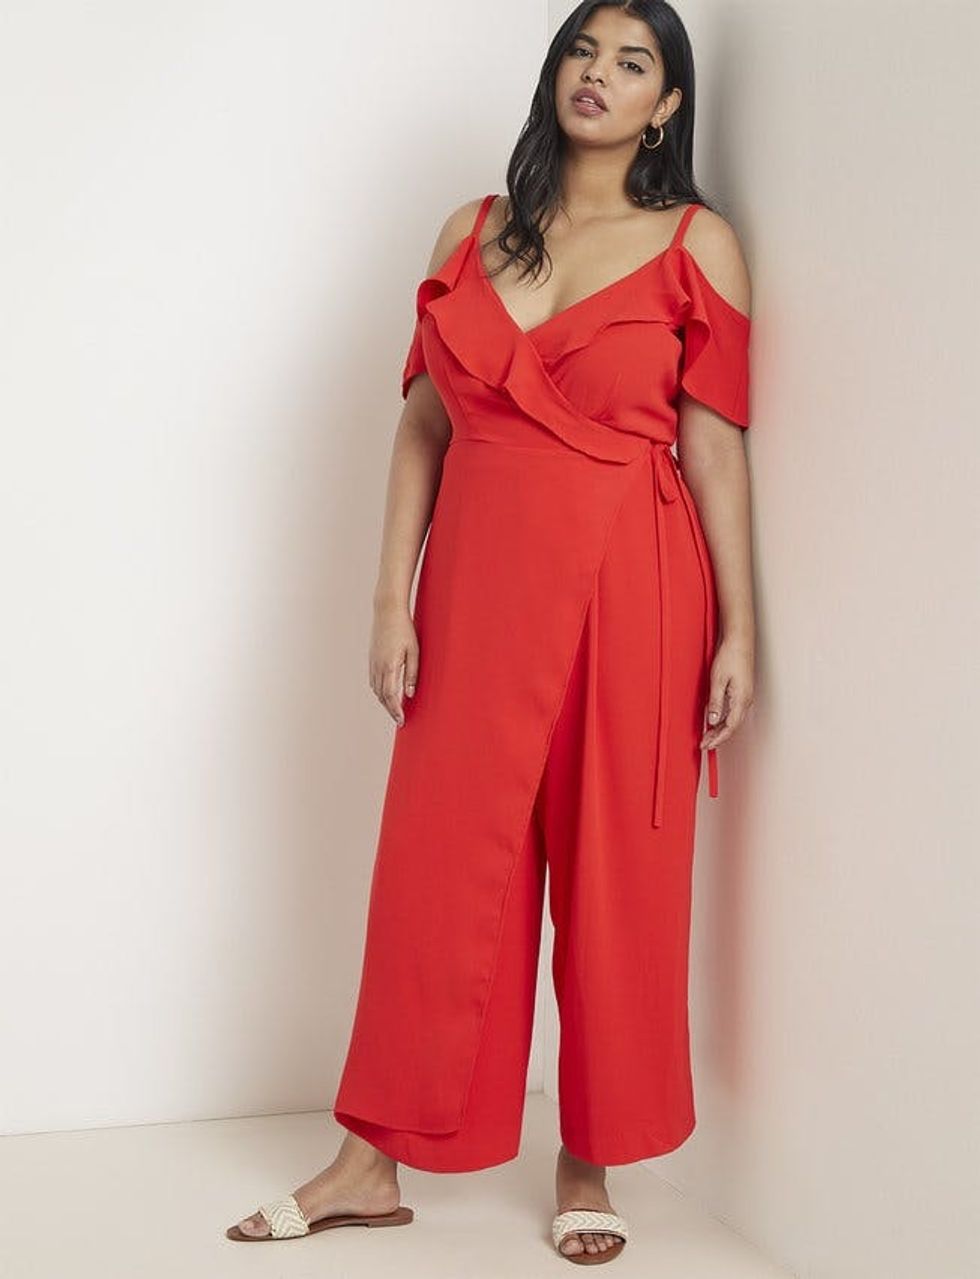 16 Wedding Guest Outfits for Babes With Big Boobs - Brit + Co